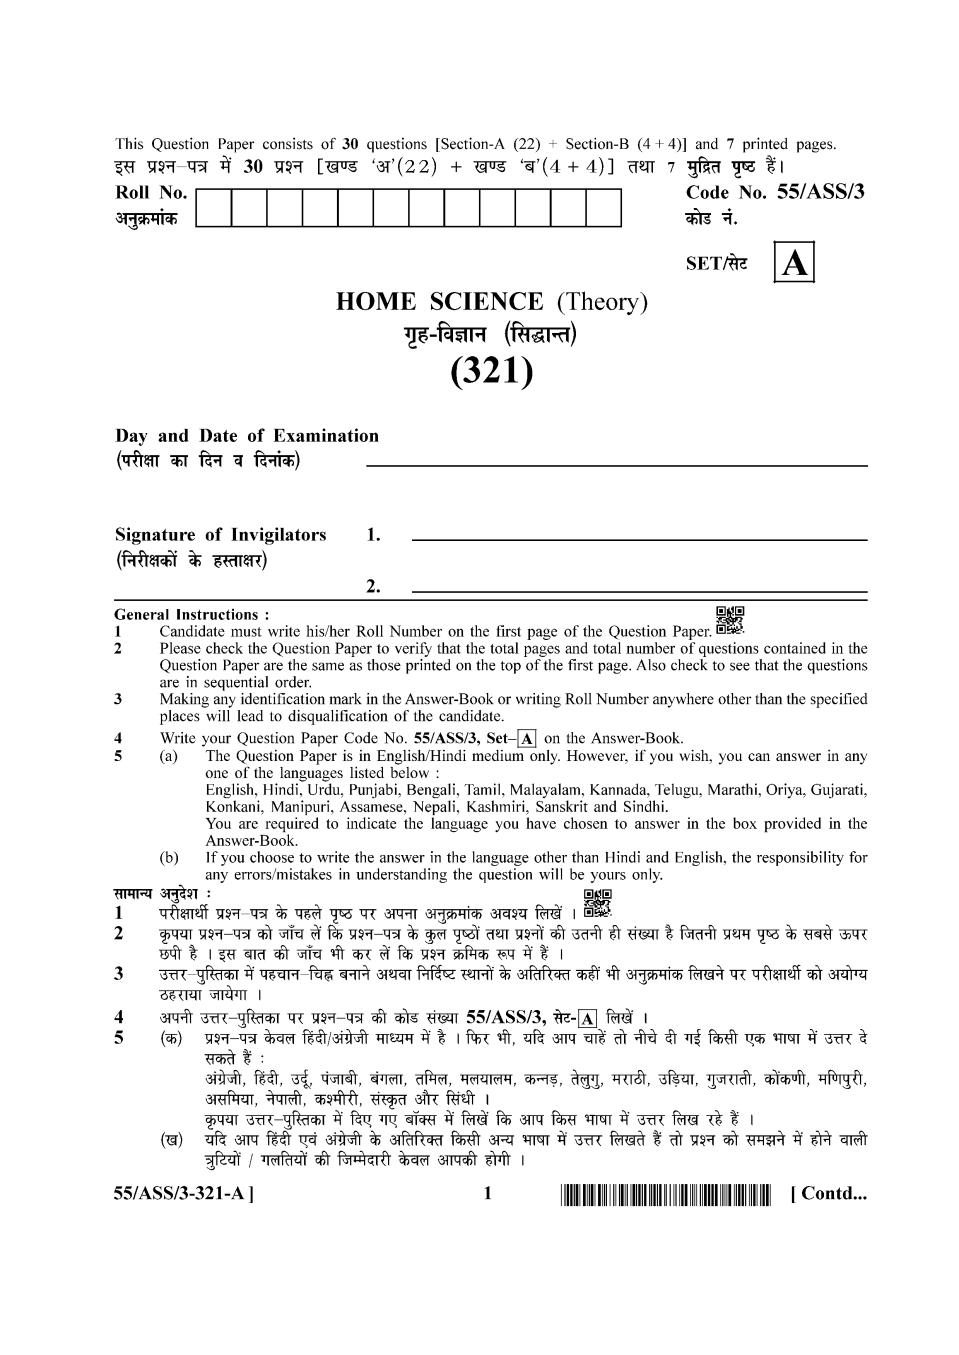 NIOS Class 12 Question Paper Oct 2017 - Home Science - Page 1